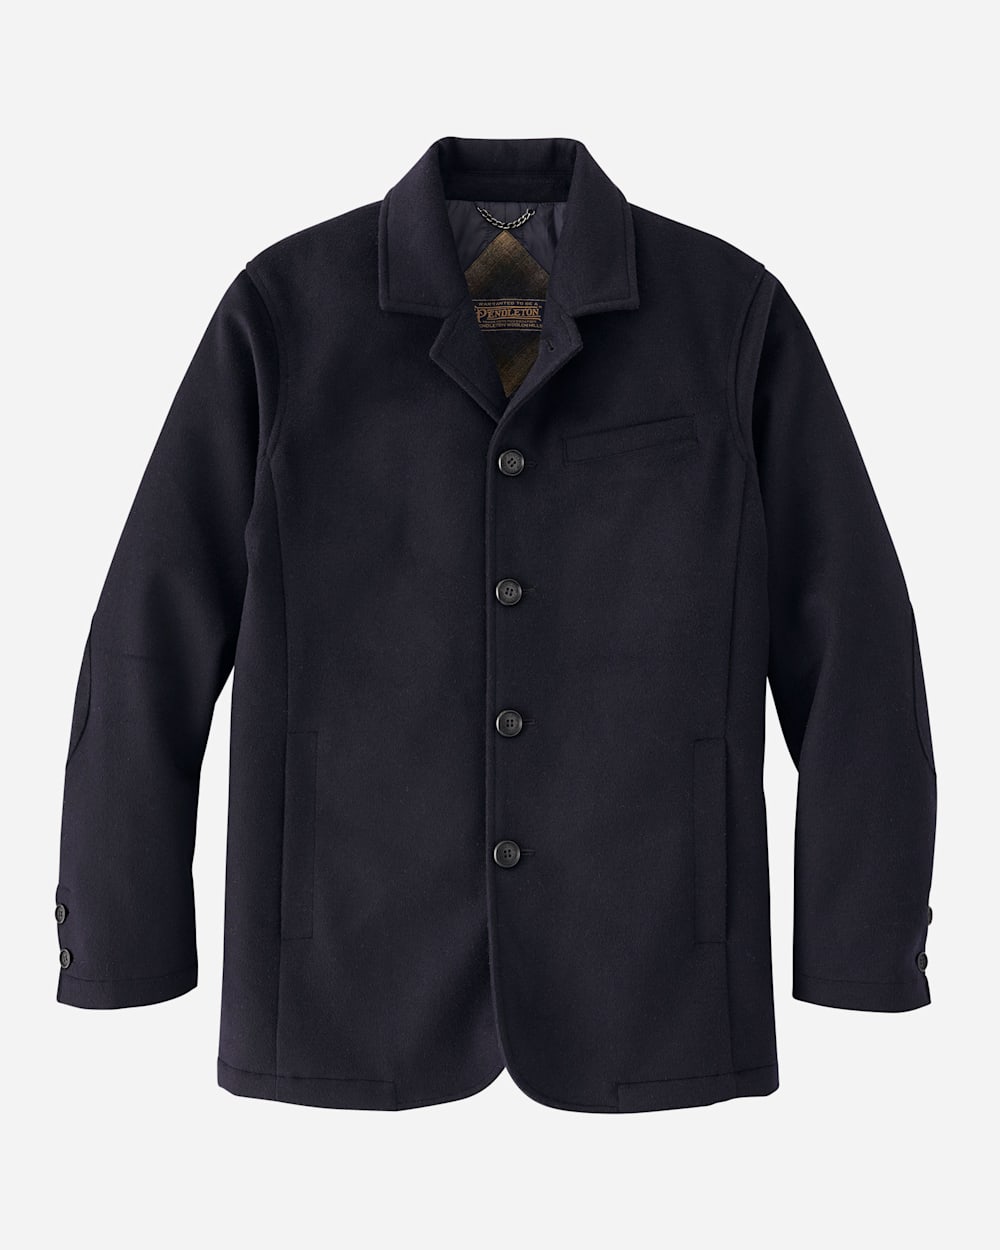 ALTERNATE VIEW OF MEN'S BRUNSWICK INSULATED JACKET IN NAVY image number 5